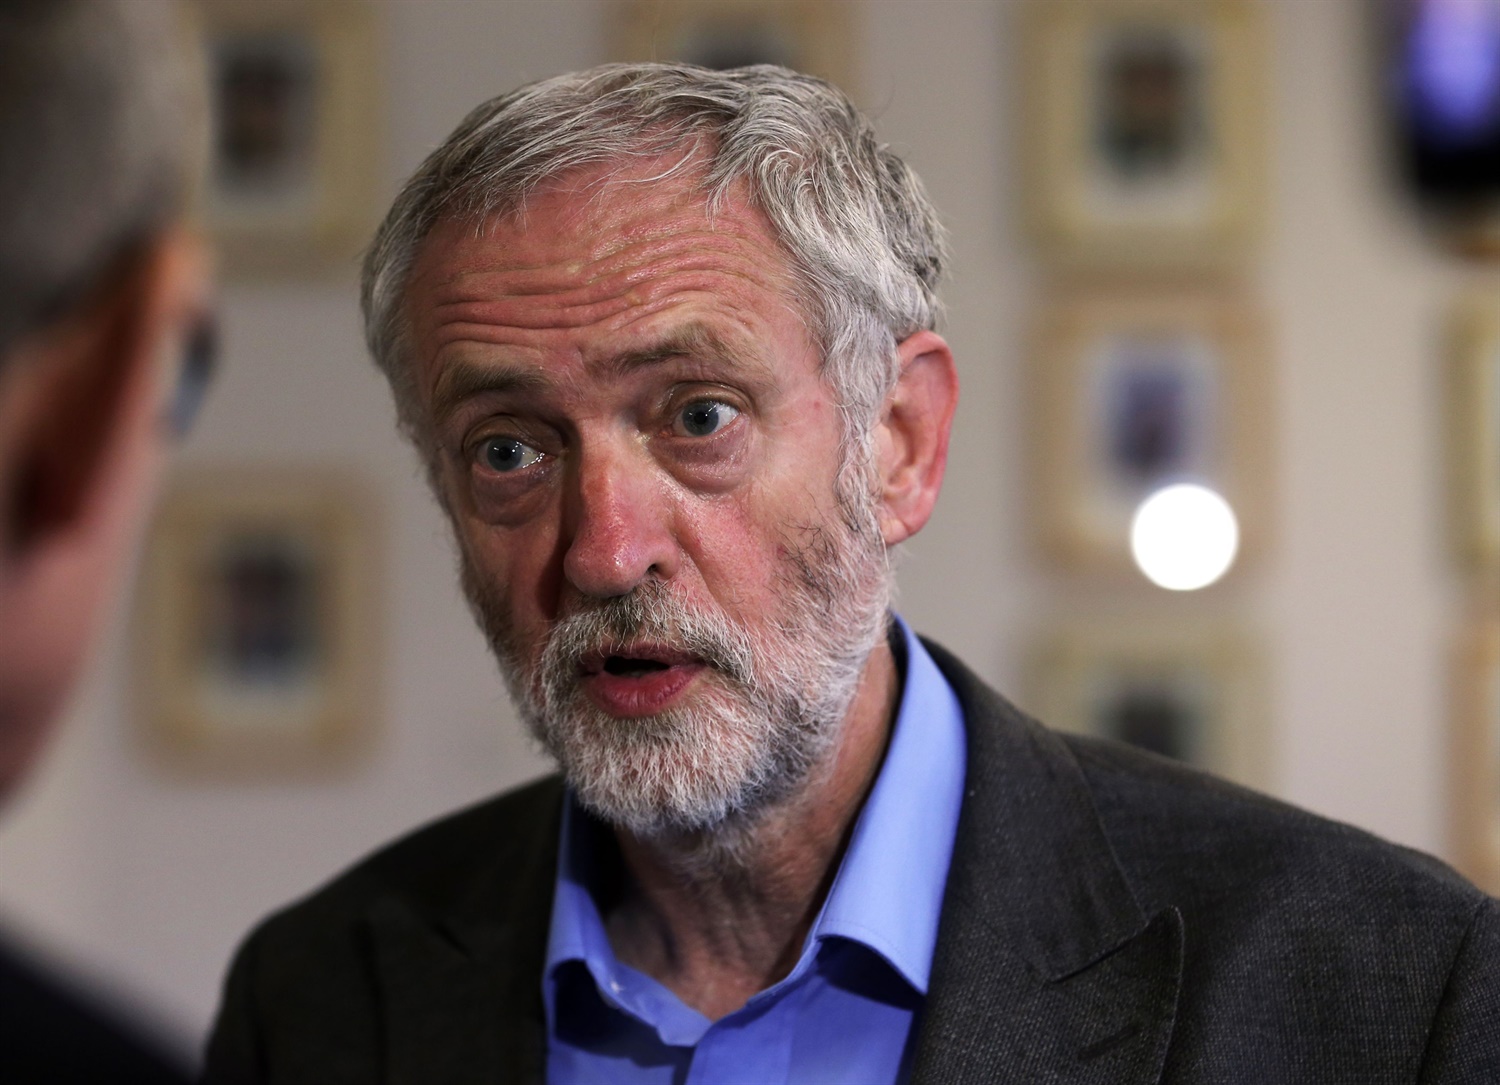 Corbyn pushes for renationalisation even as NR faces full privatisation